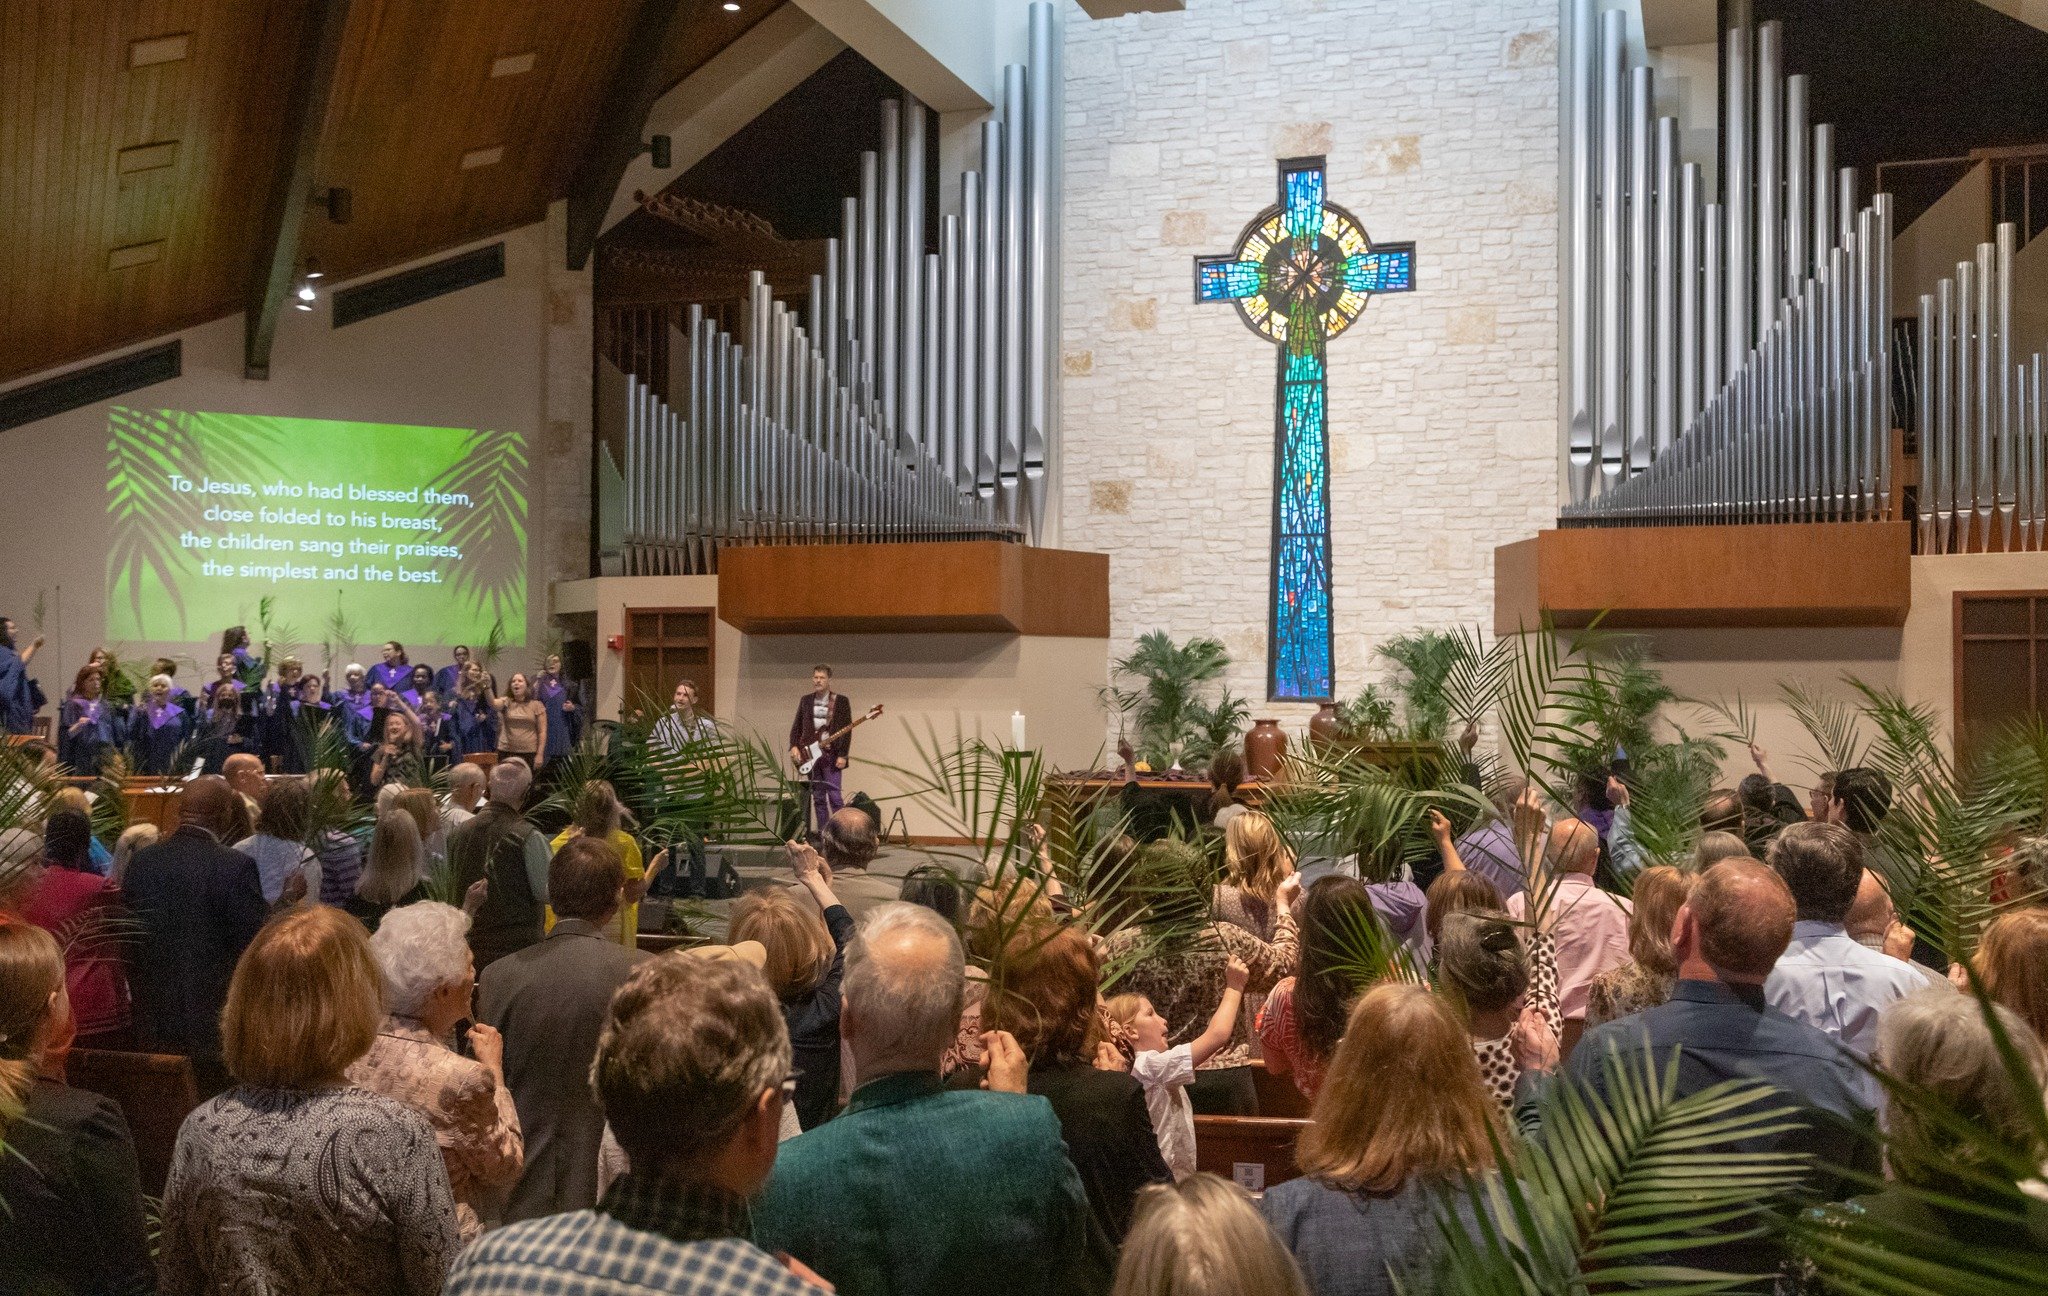 🌴Join us this Palm Sunday! We will have a full choir at both services, trumpet, children's singing, palm parade, and a first-person sermon from Pastor Emily!🌴